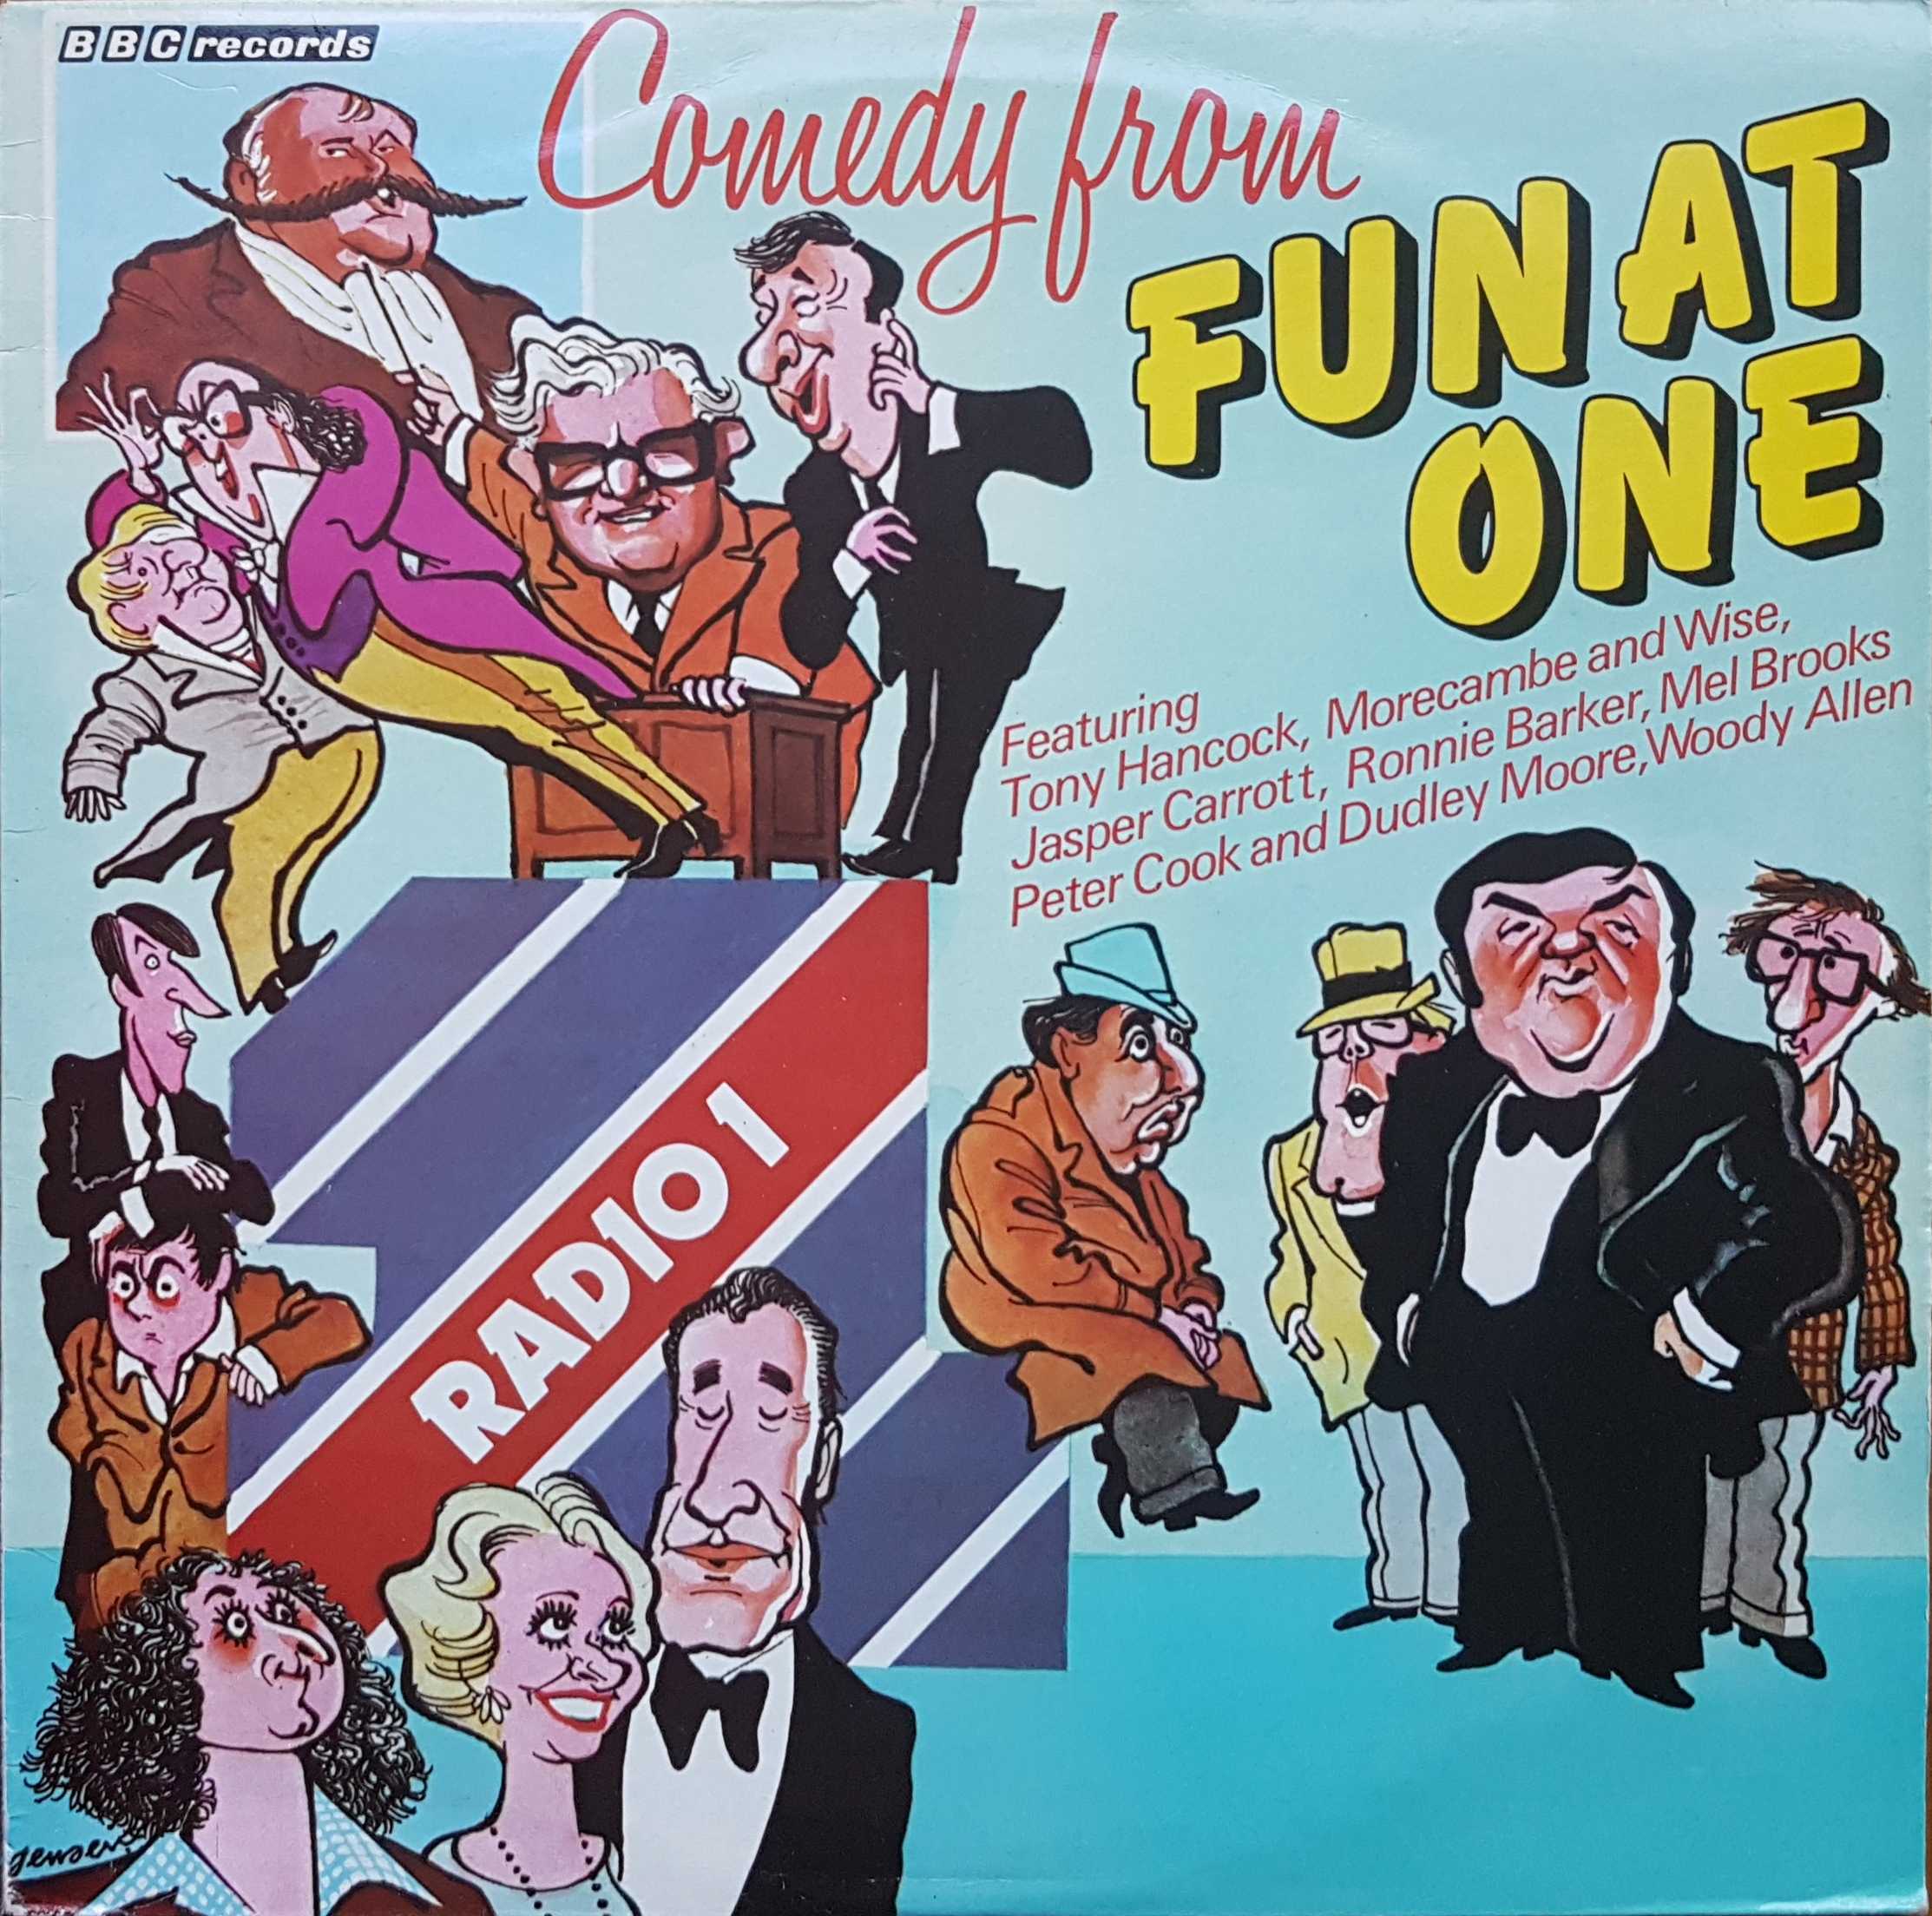 Picture of REB 371 Fun at one by artist Various from the BBC albums - Records and Tapes library